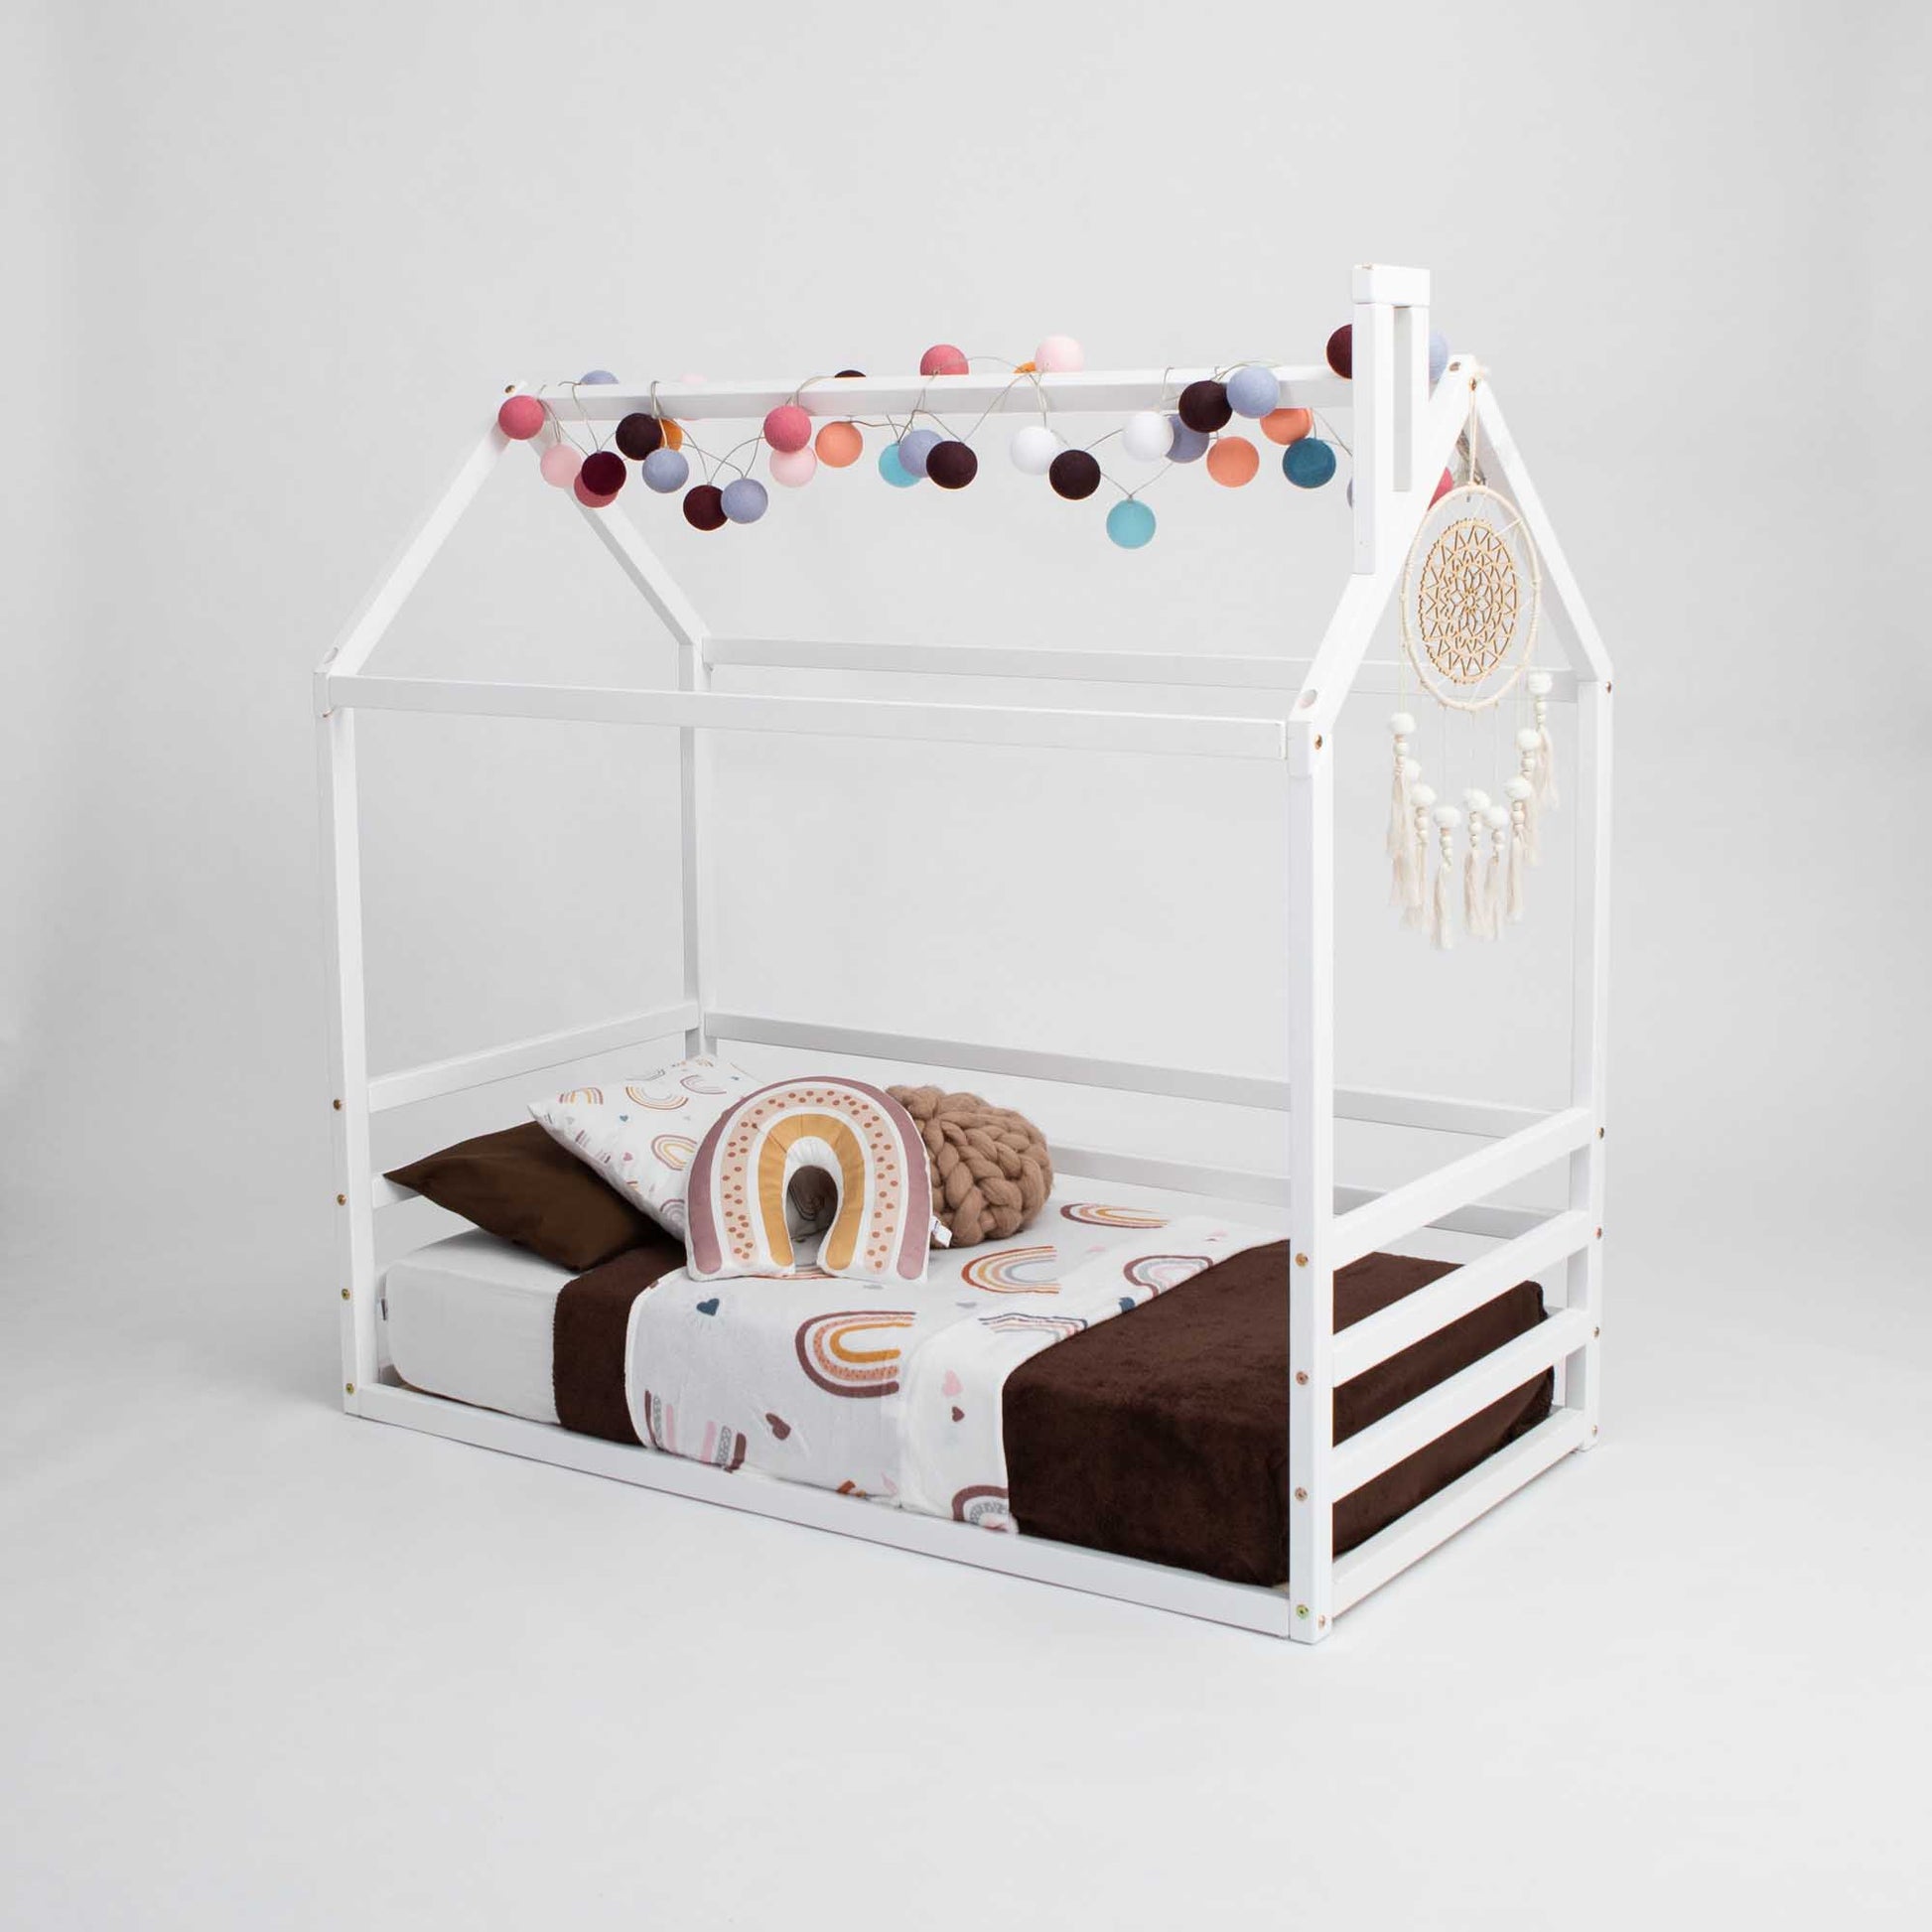 A Kids' house-frame bed with 3-sided horizontal rails and pom poms for toddlers.